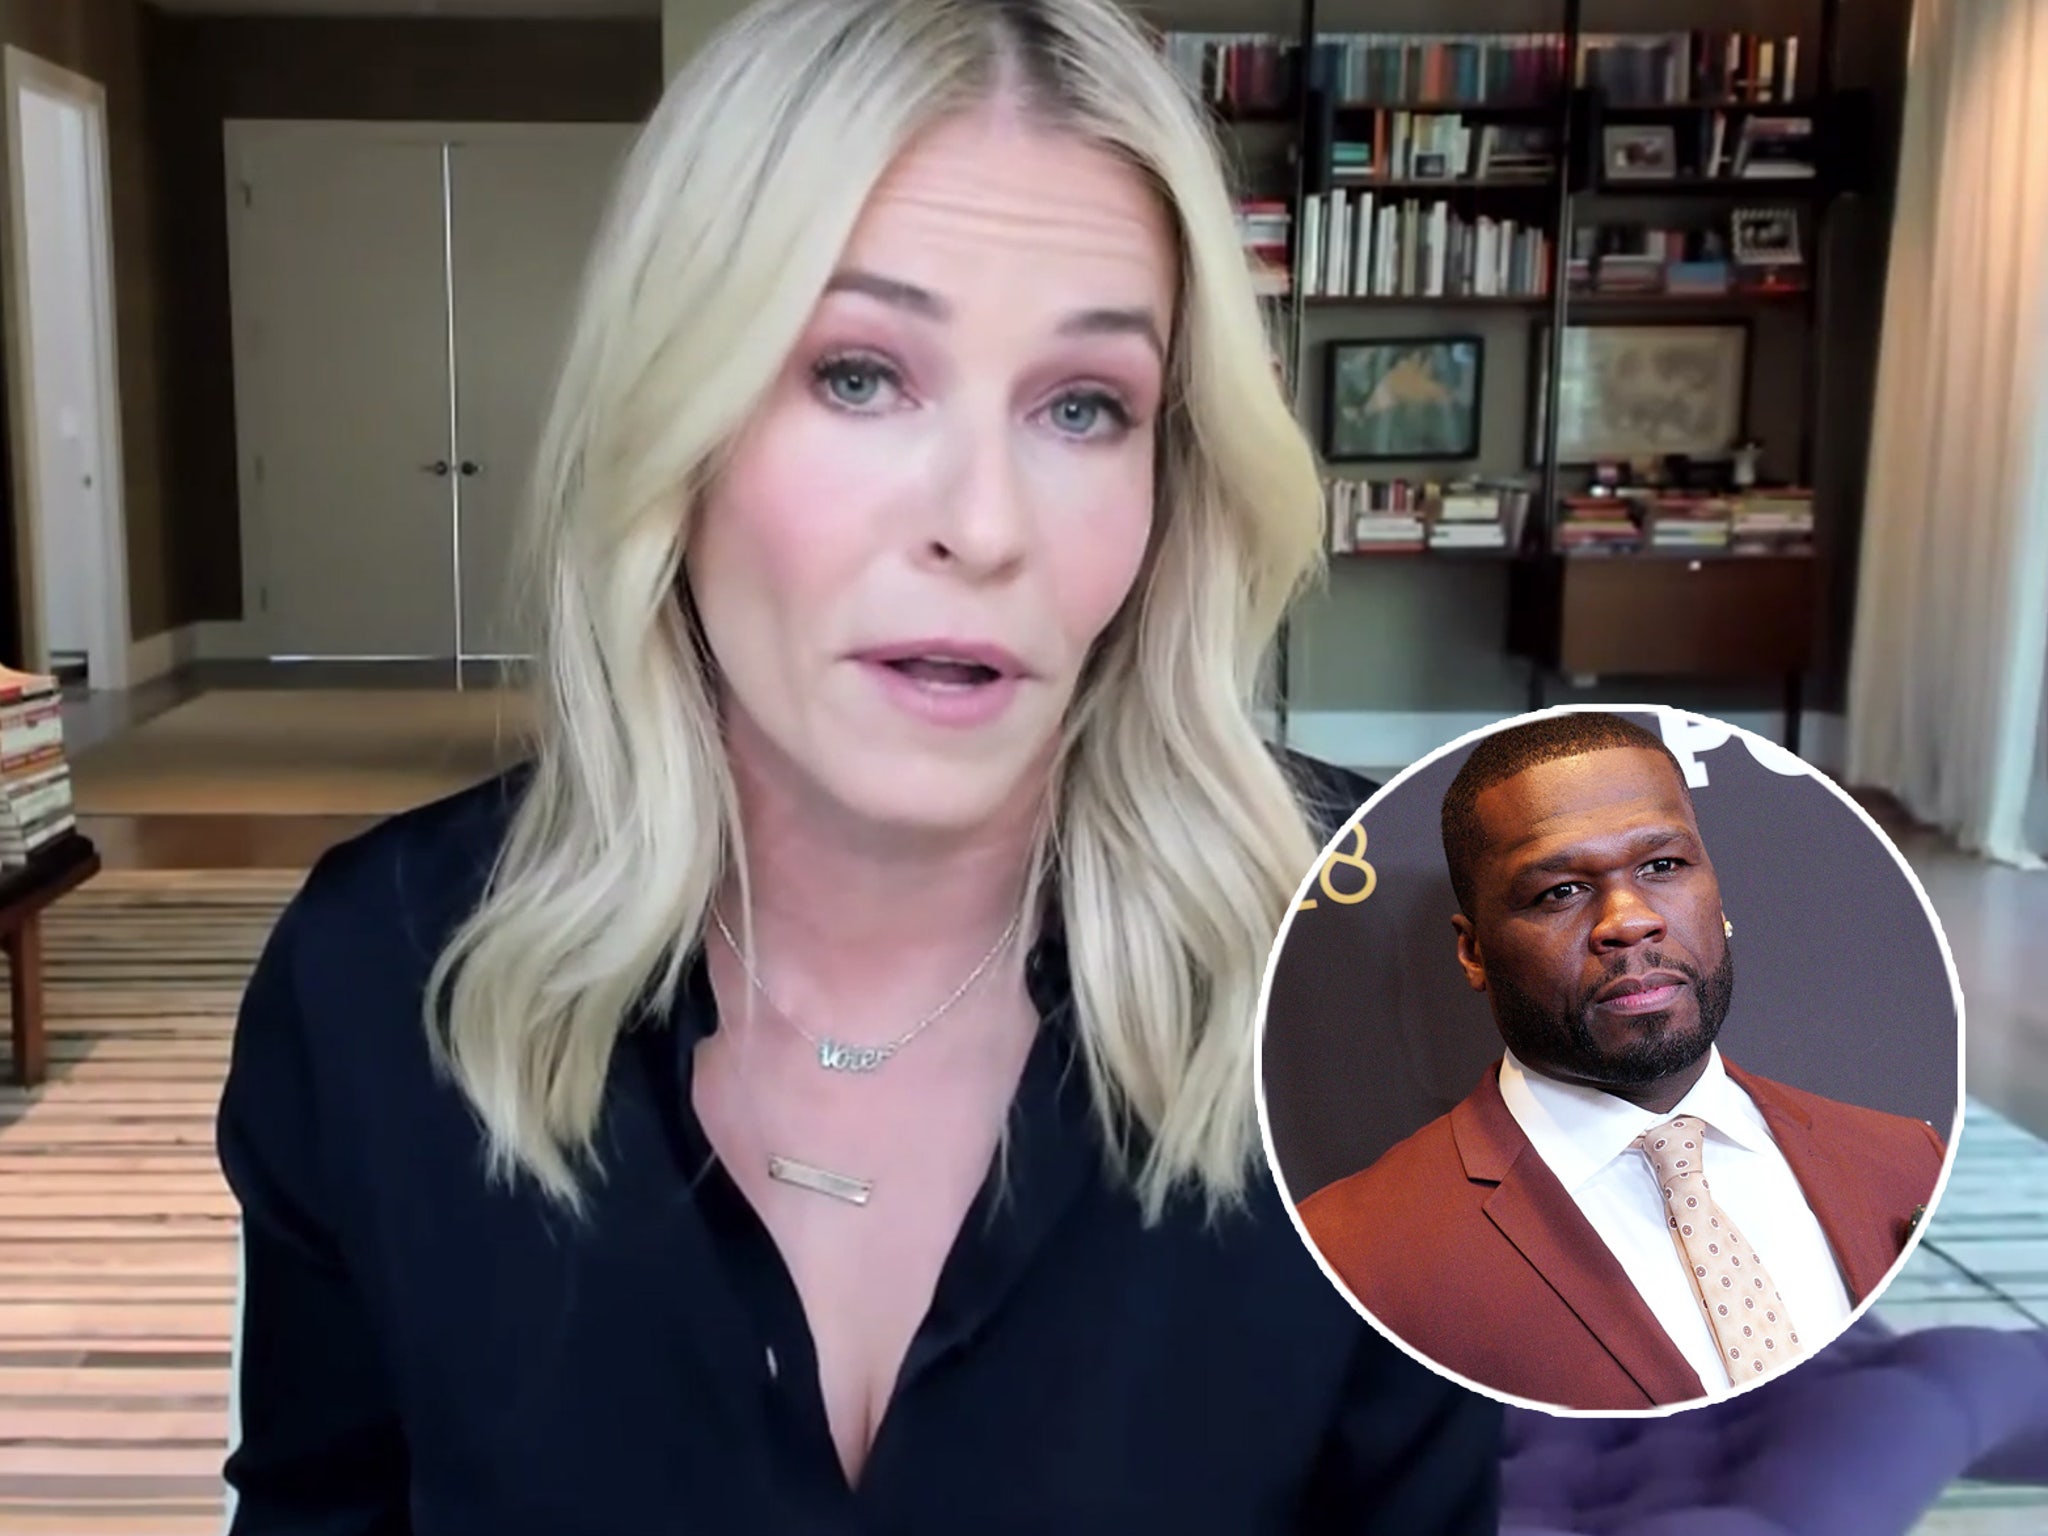 Chelsea handler dating cent and 50 Does Chelsea